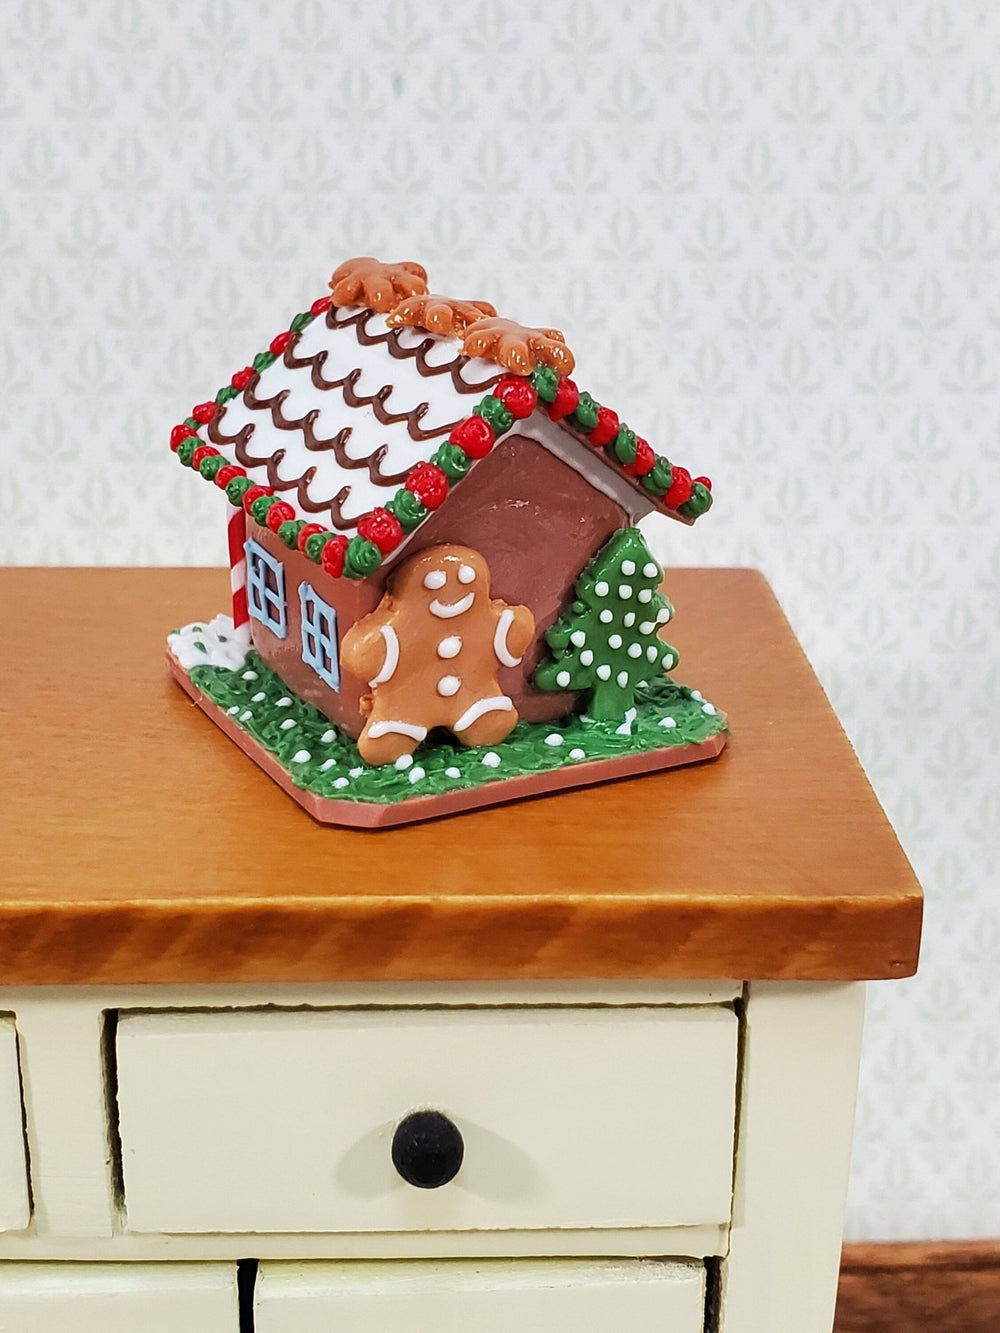 Dollhouse Gingerbread House Christmas House with Candy Canes 1:12 Scale Miniature - Miniature Crush